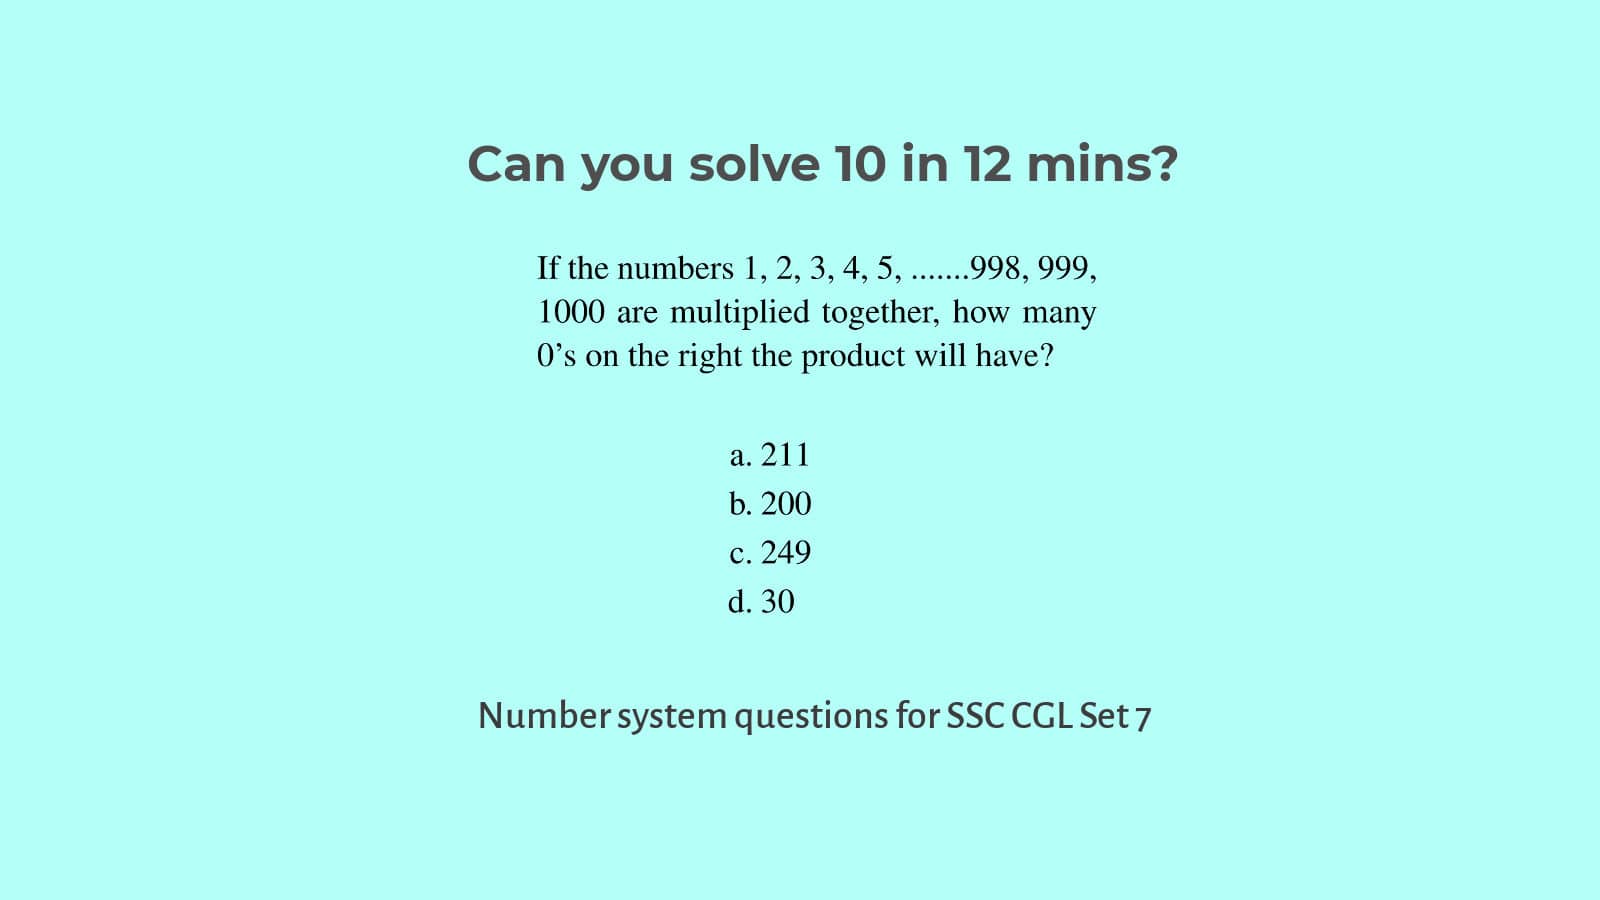 Number system questions for SSC CGL set 7